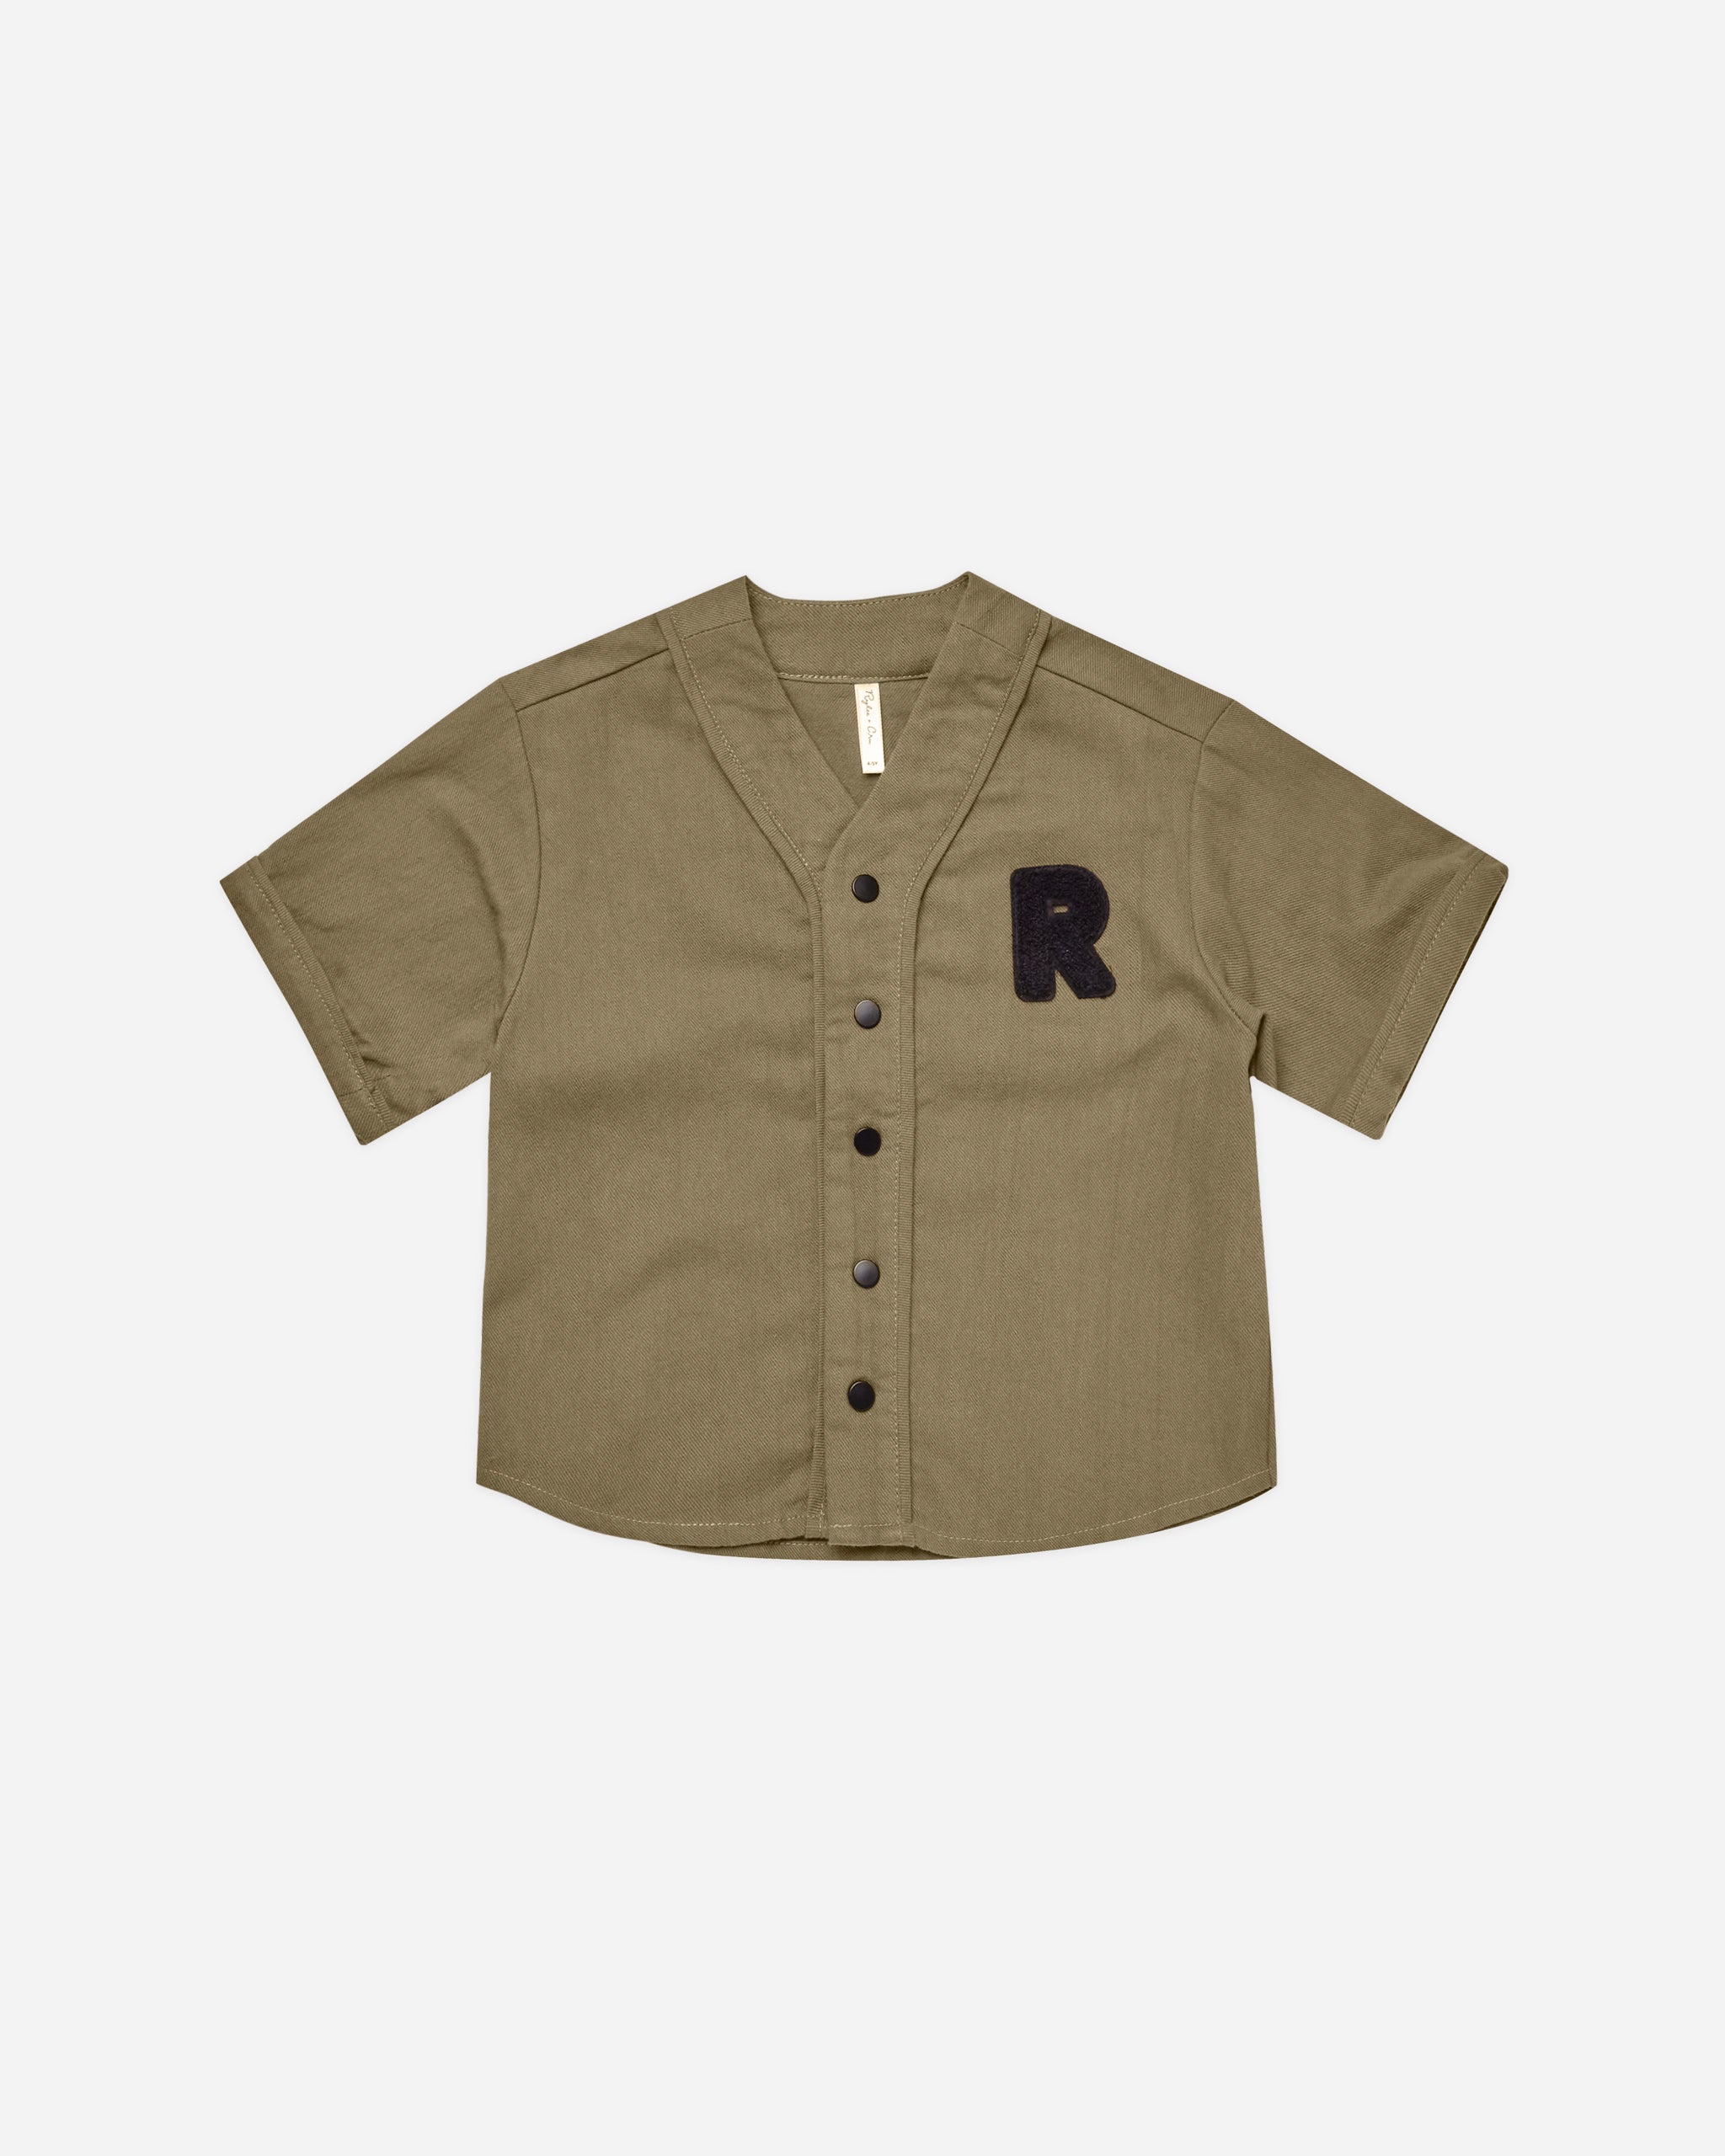 Baseball Shirt || Moss - Rylee + Cru | Kids Clothes | Trendy Baby Clothes | Modern Infant Outfits |